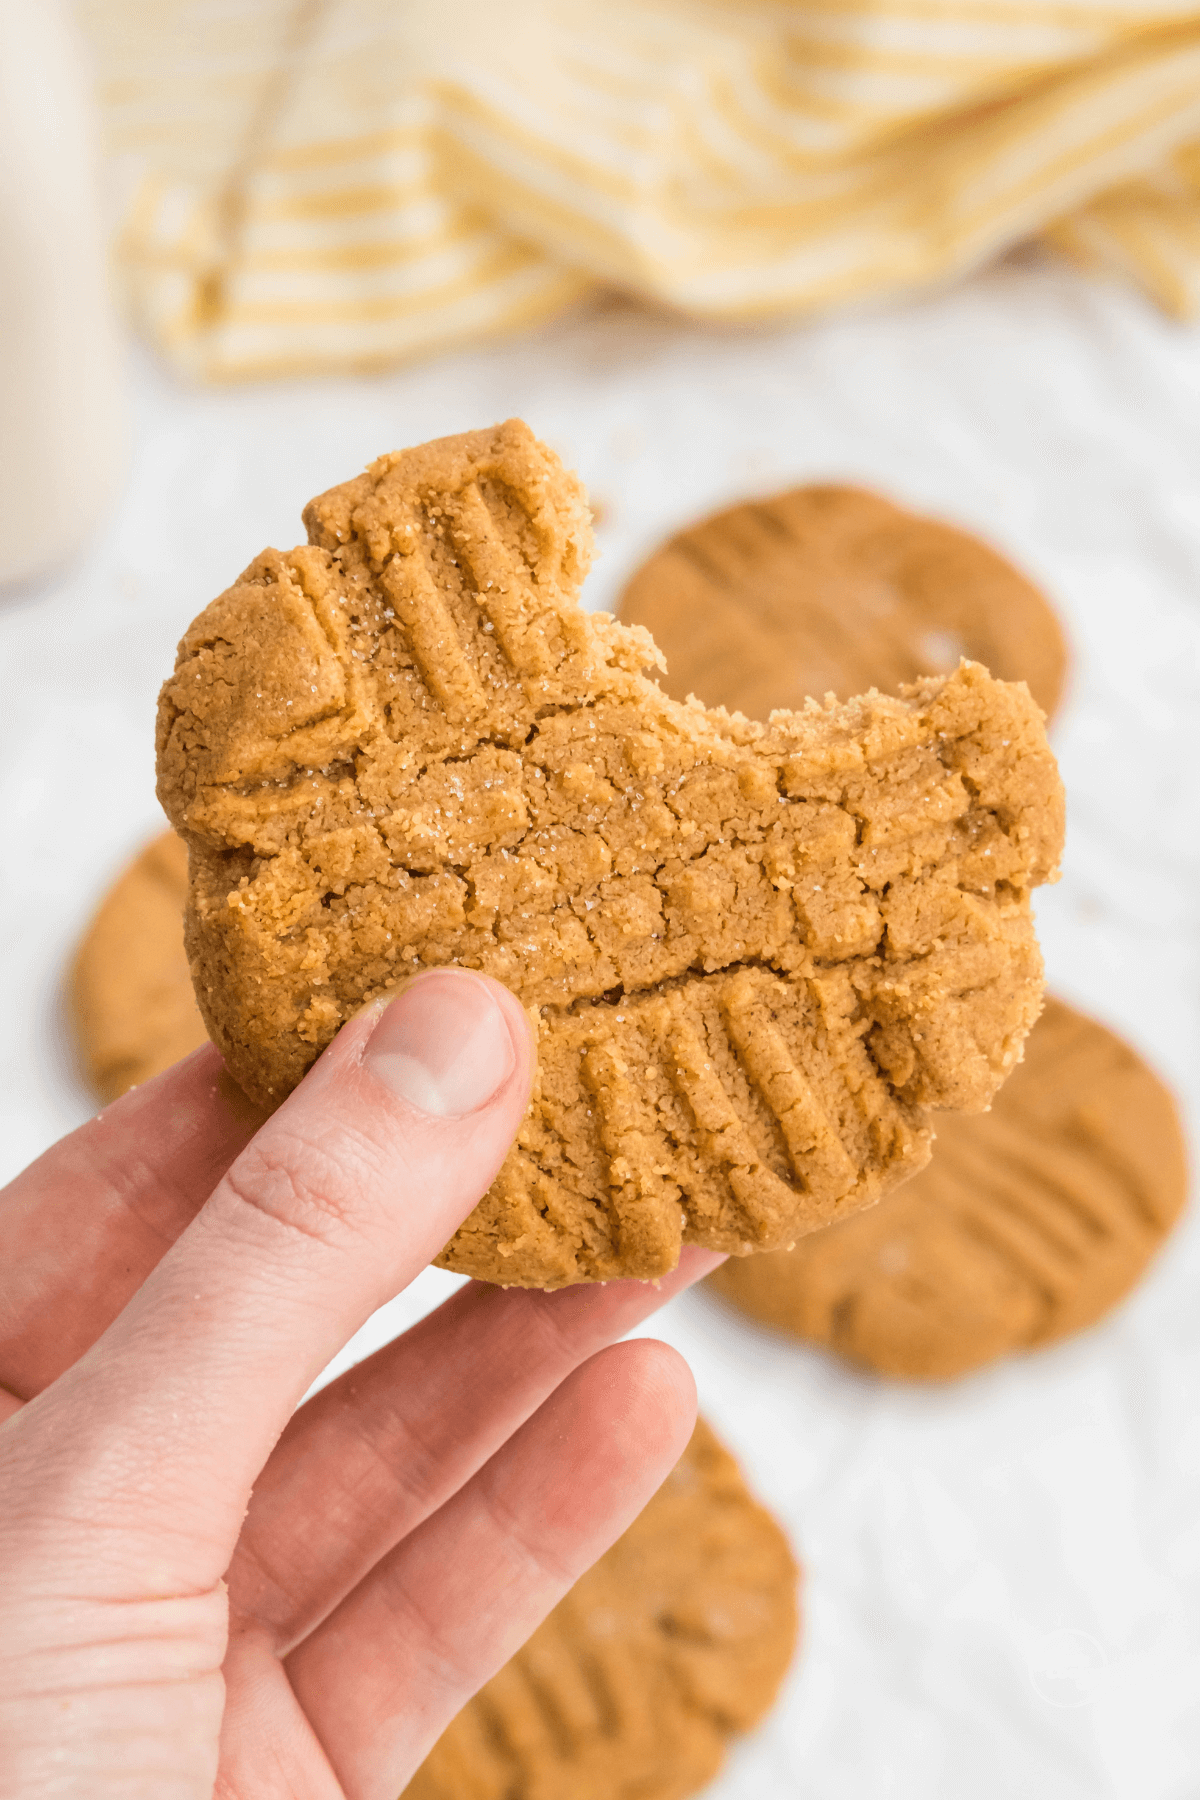 Hand holding peanut butter cookie with bite taken out of it.